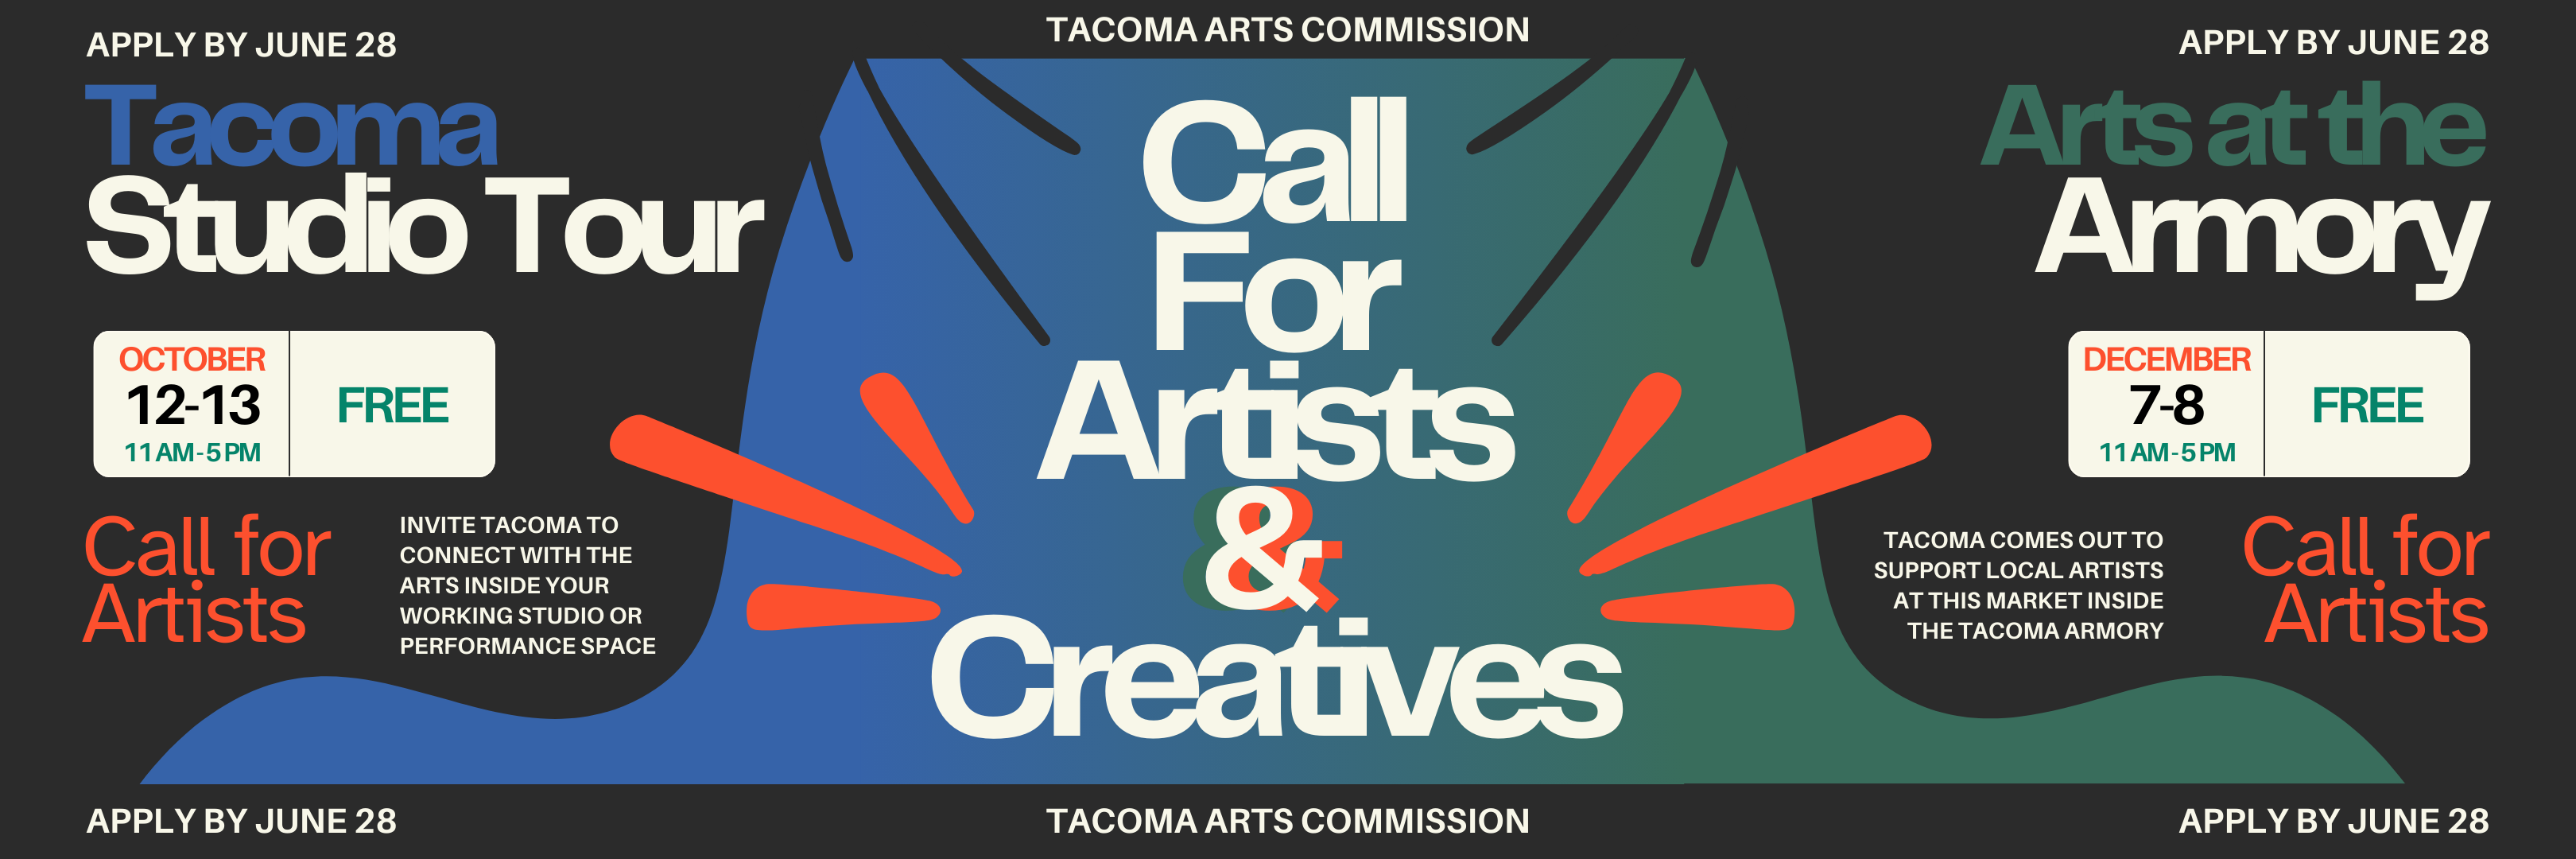 Image marketing the Call for Artists below